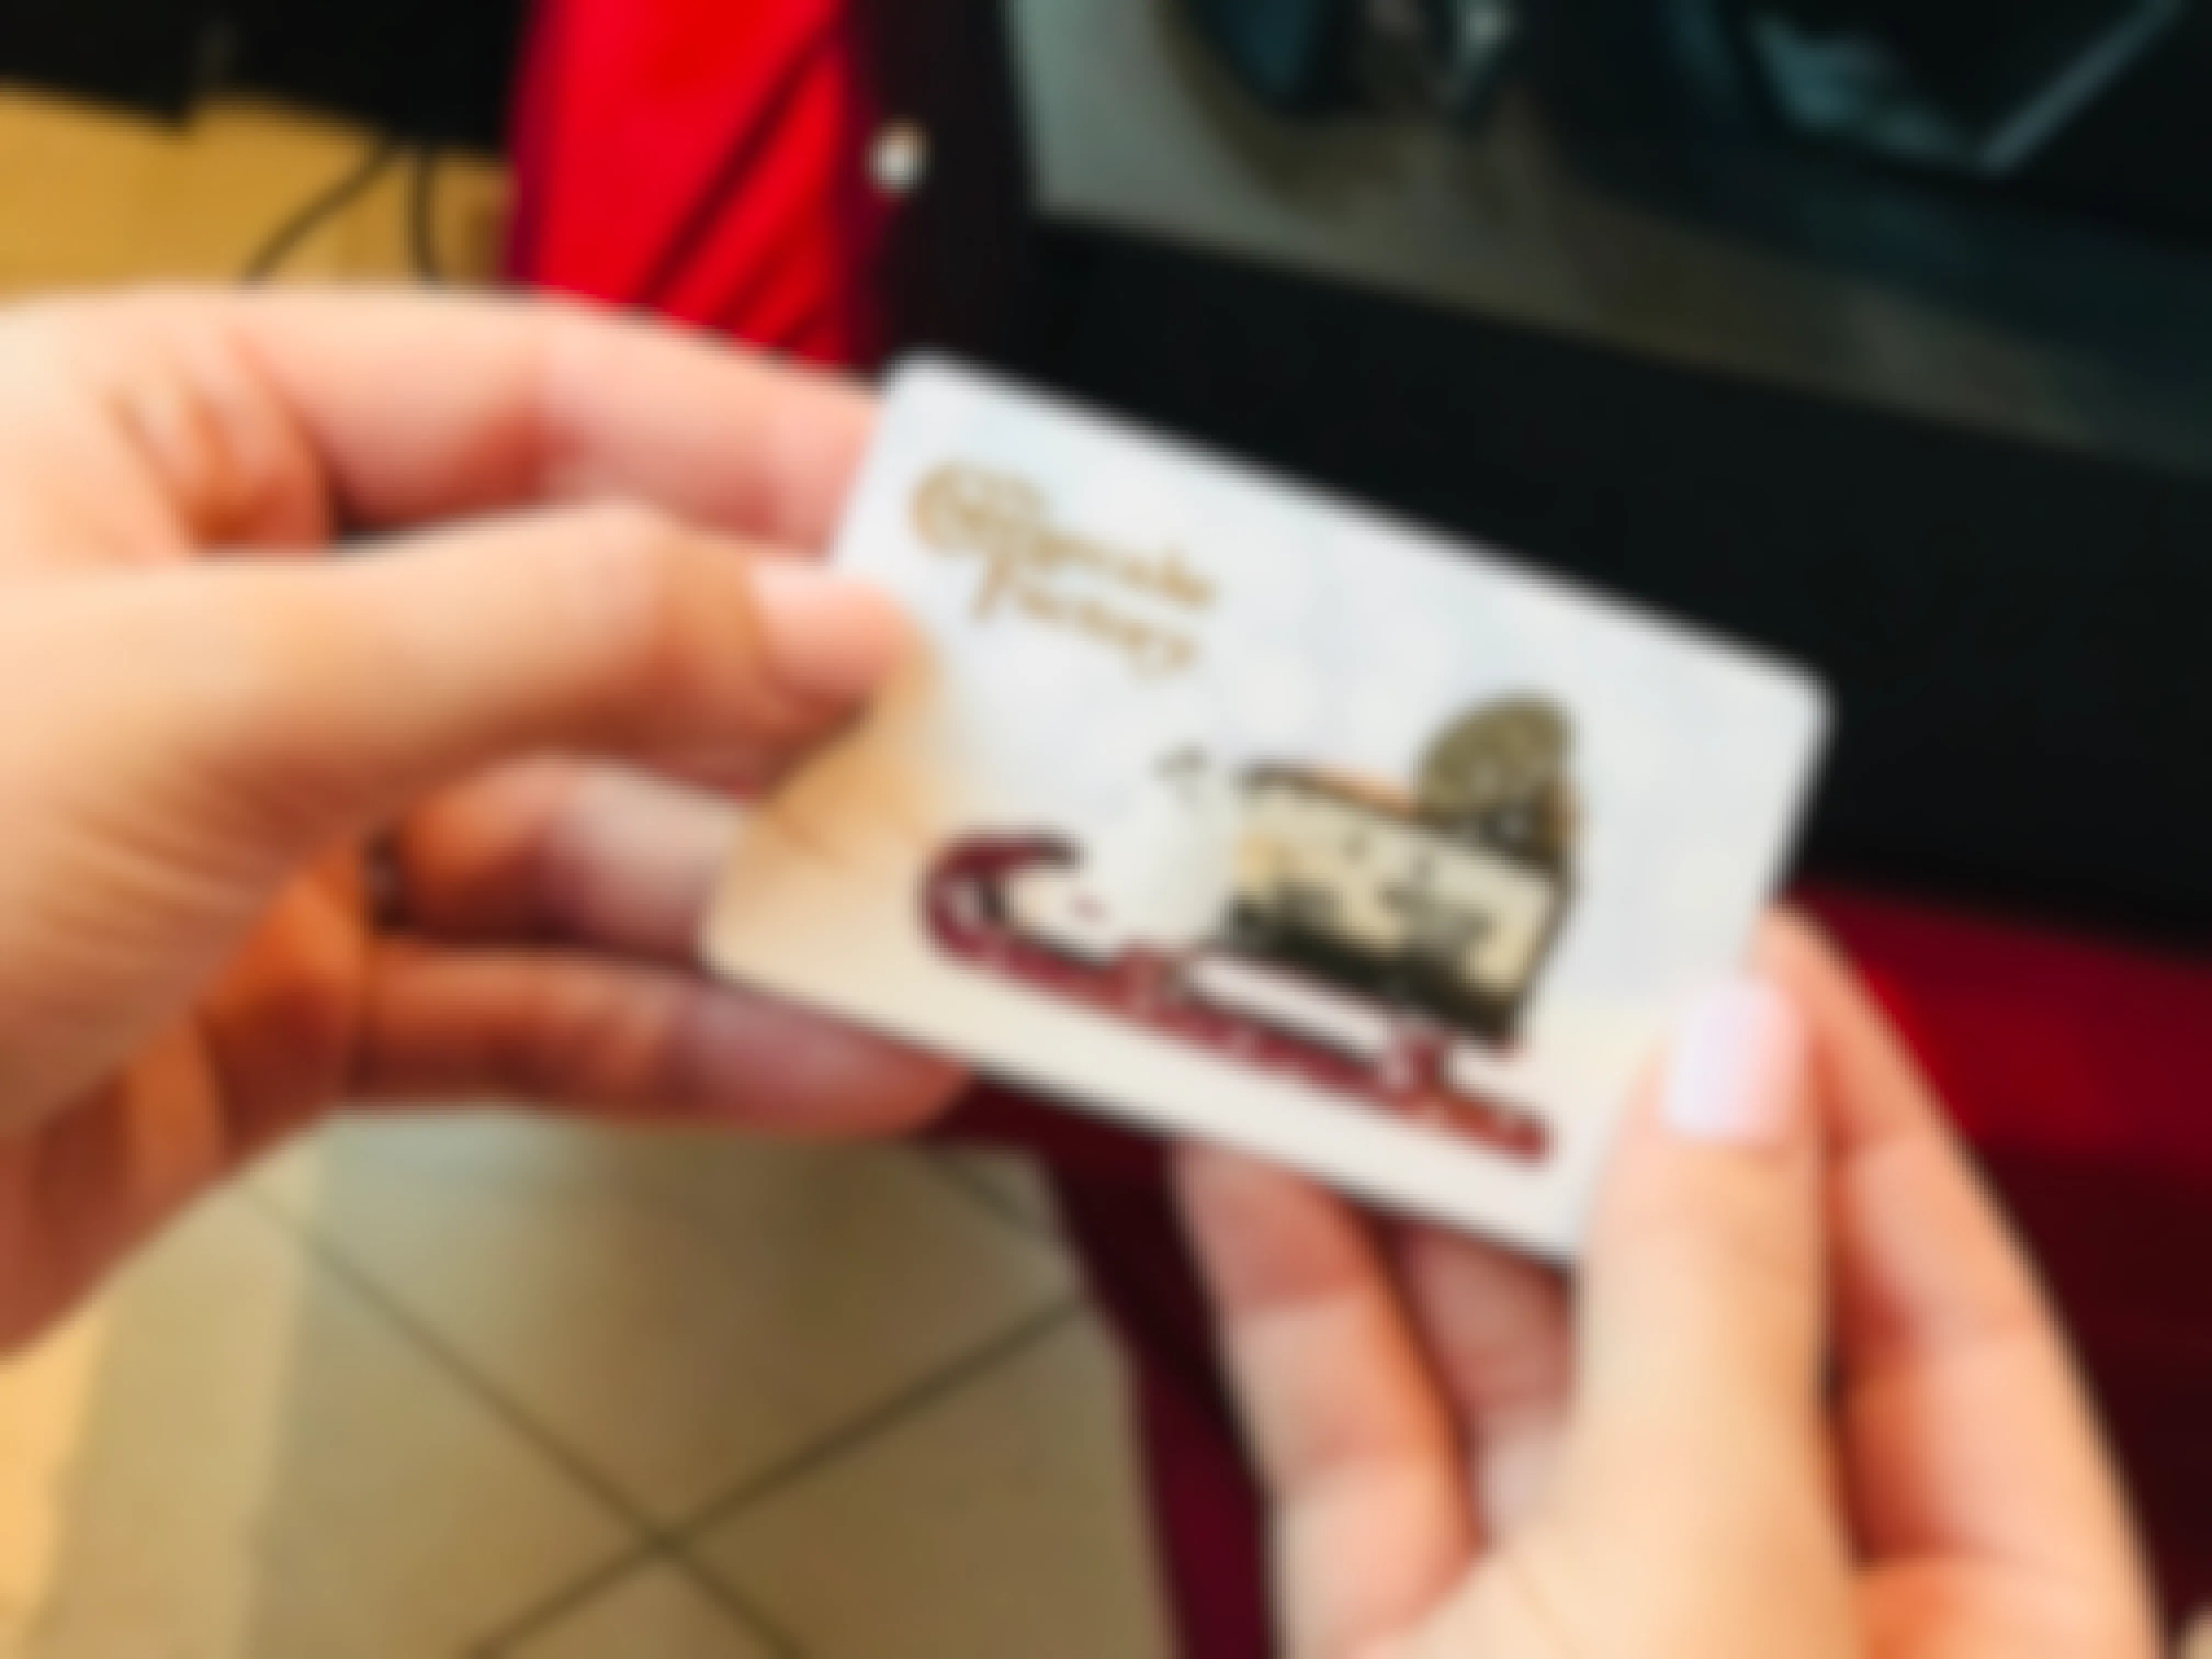 A person's hands holding a gift card for The Cheesecake Factory.